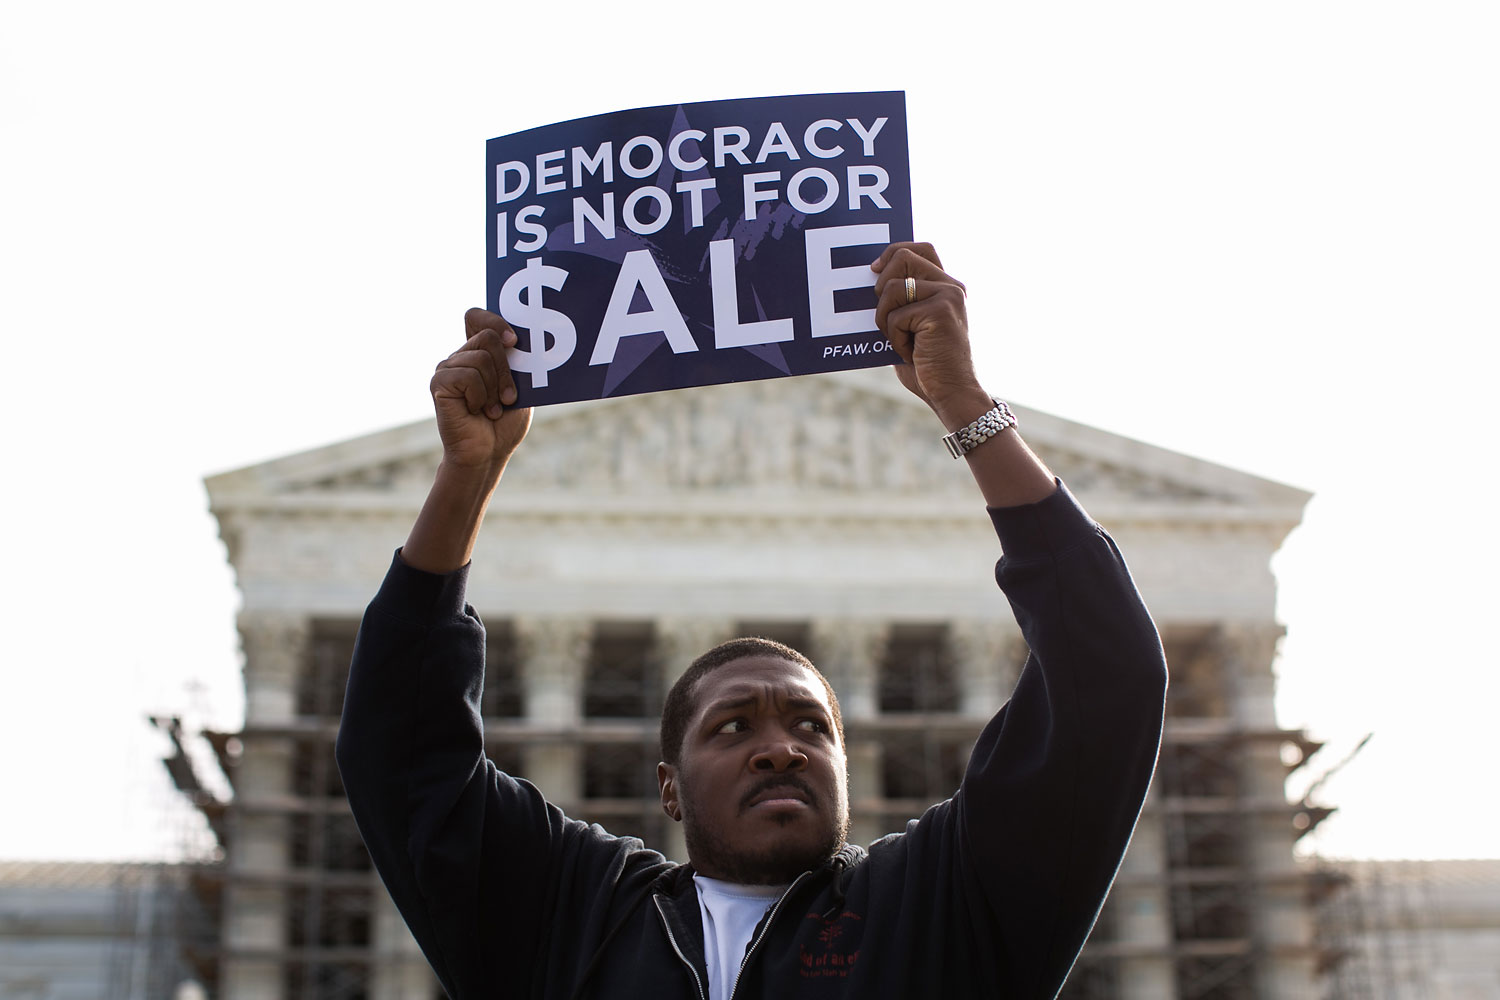 Cornell Woolridge holds a sign as he rallies against money in politics, at the Supreme Court in Washington, on October 8, 2013 in Washington, DC.